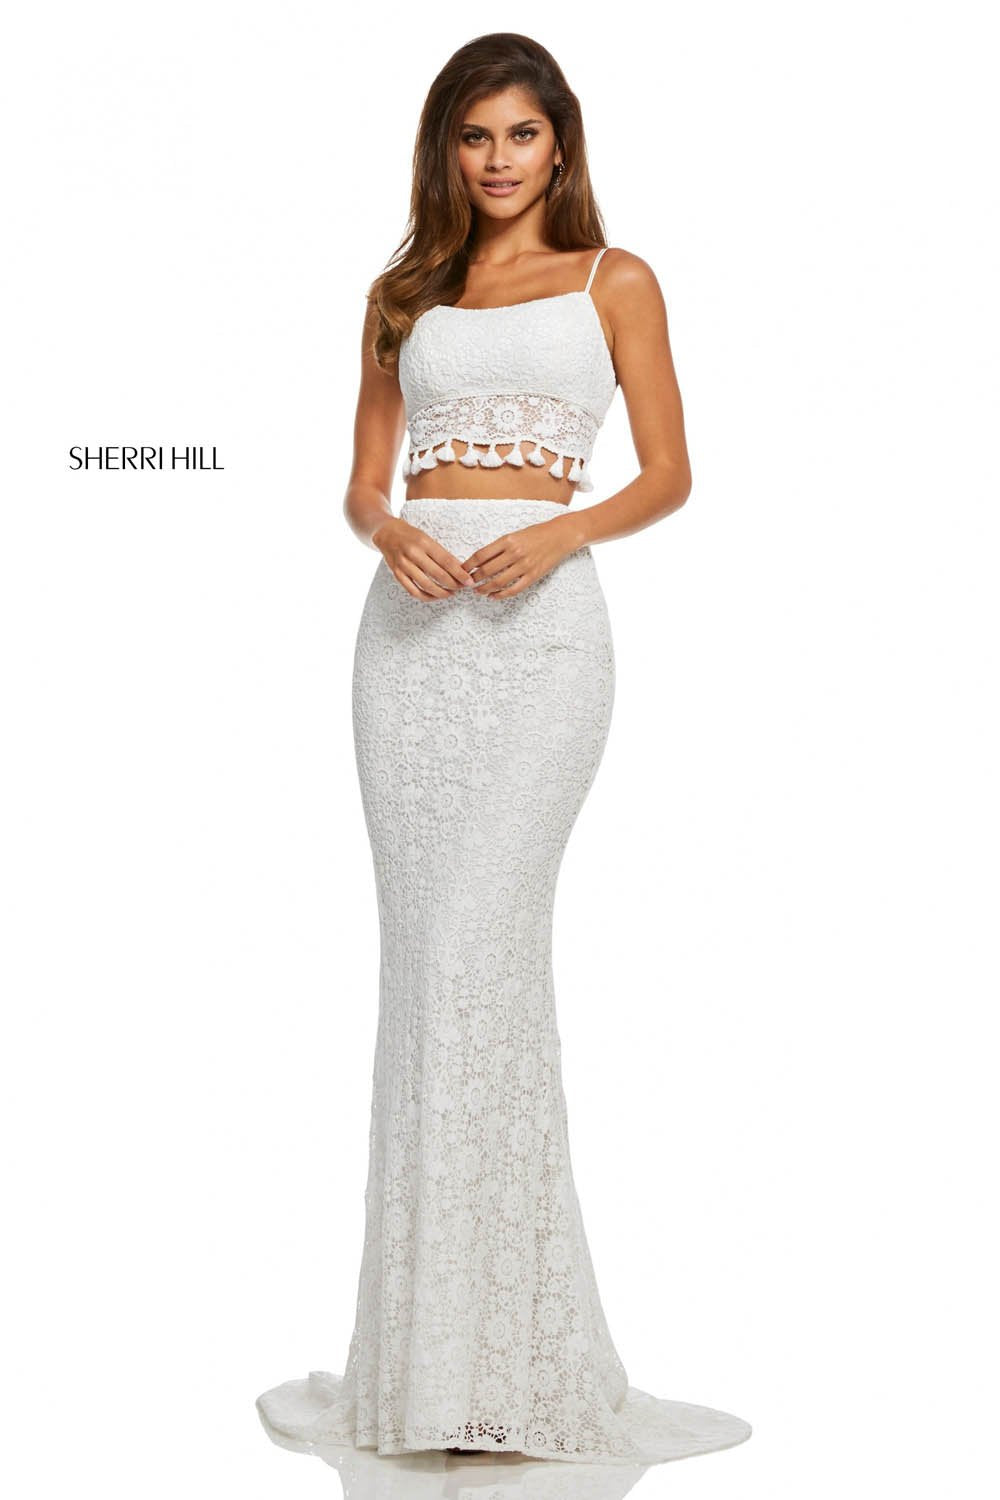 Sherri Hill 52810 dress images in these colors: Black, Aqua, Light Yellow, Lilac, Ivory.